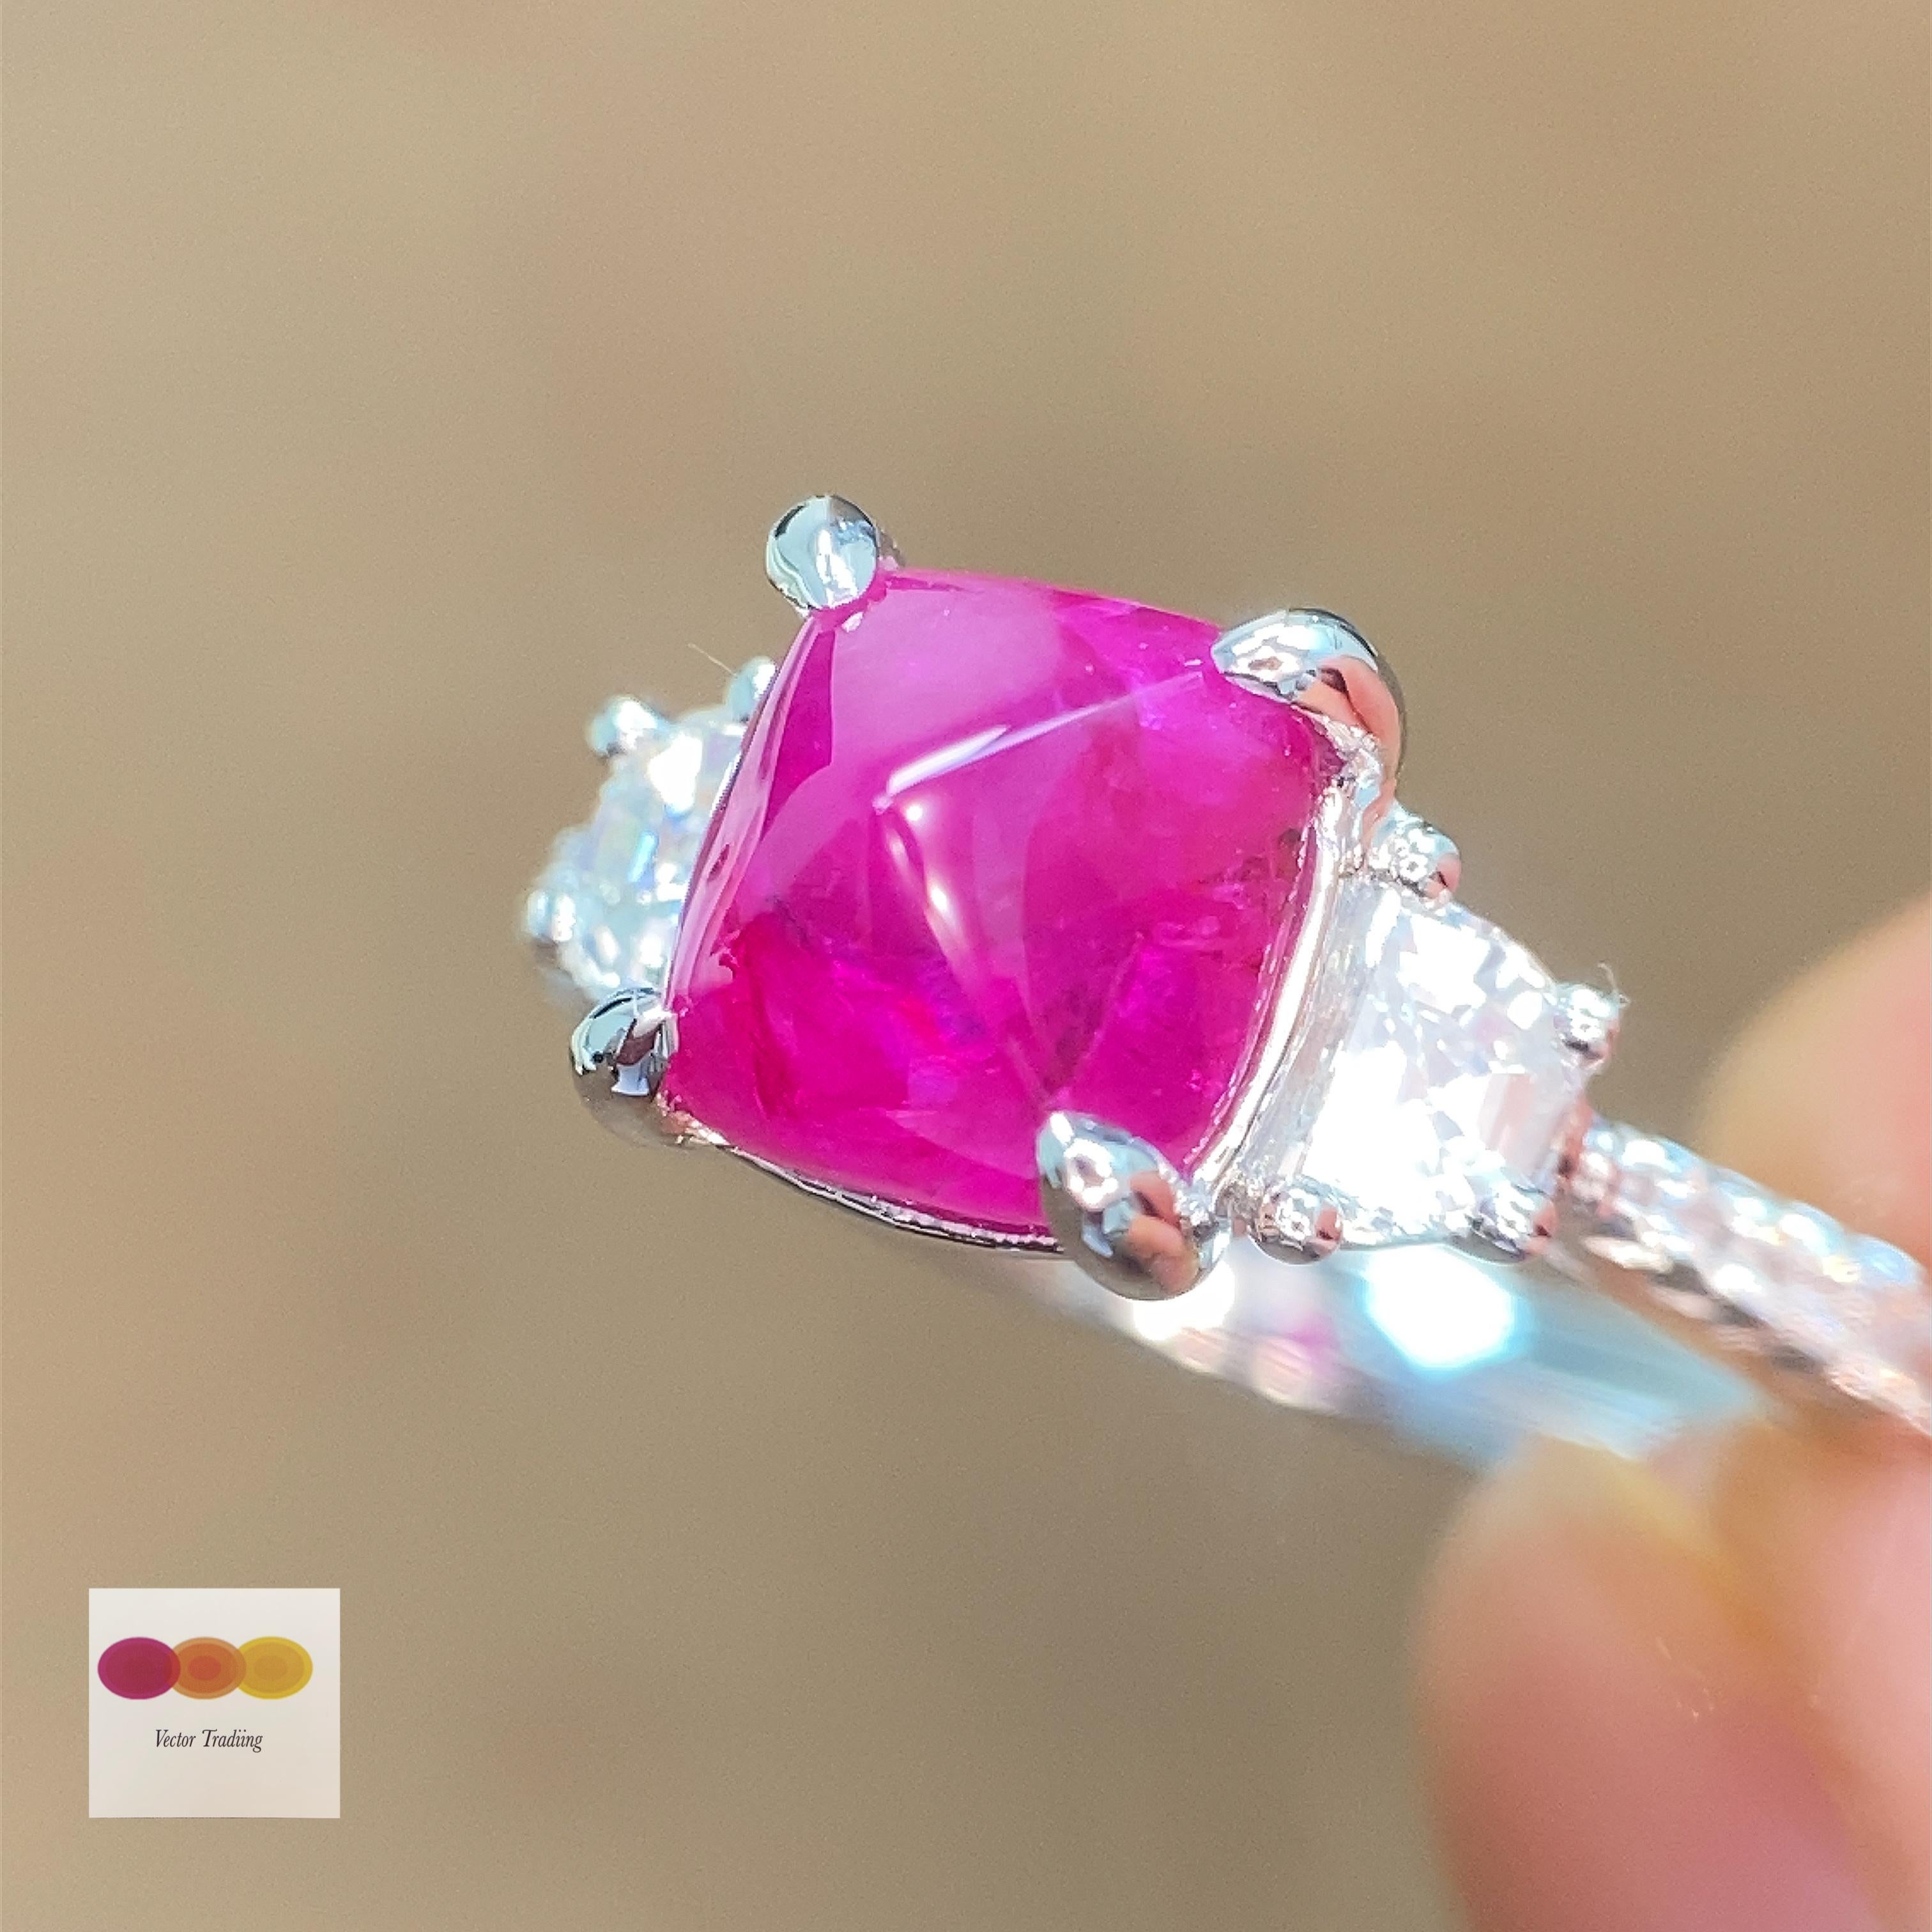 2.07 Carat GIA Certified Vietnam No Heat Ruby Sugarloaf and White Diamond Ring:

A playful ring, it features an unheated Vietnamese intense pinkish red ruby sugarloaf weighing 2.07 carat, surrounded by white trapezoid-cut and round brilliant-cut